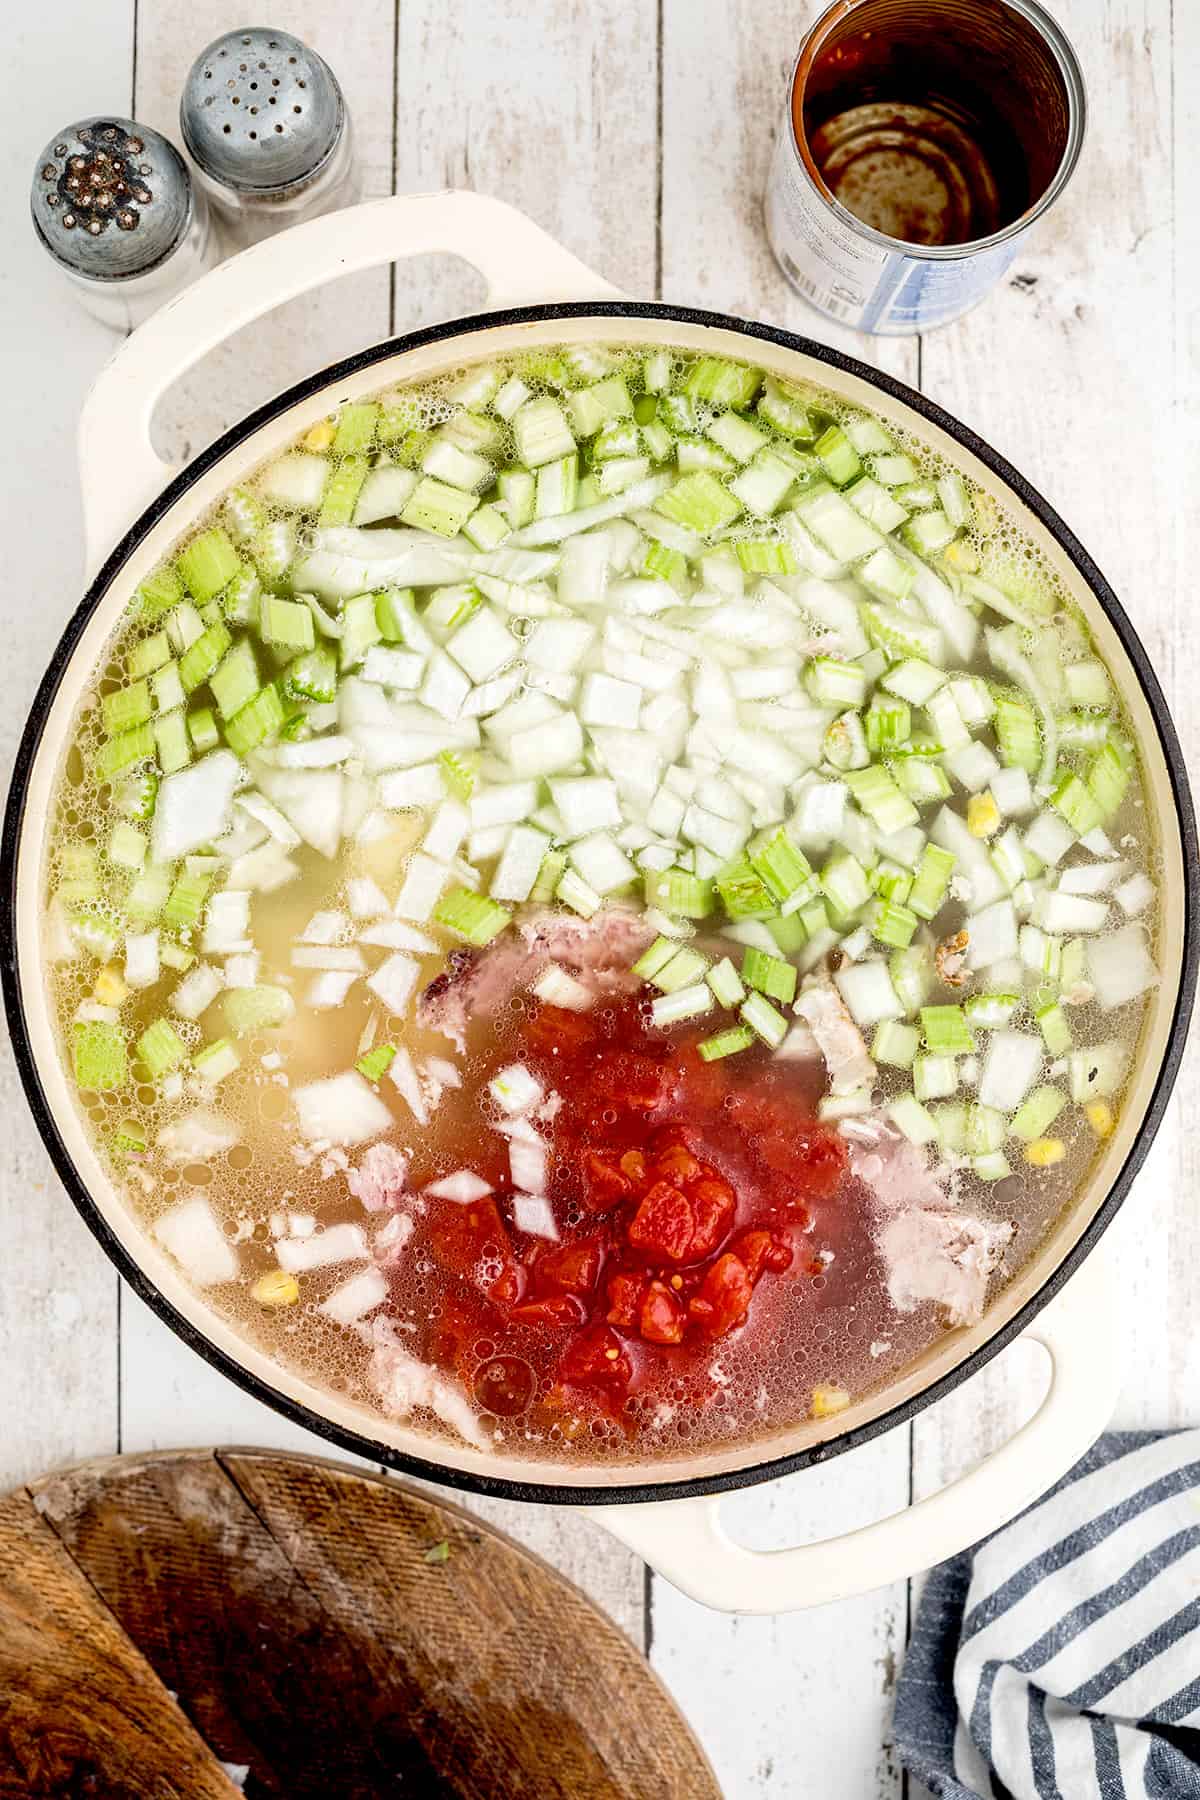 Onion, celery, and tomatoes added to the ham broth.